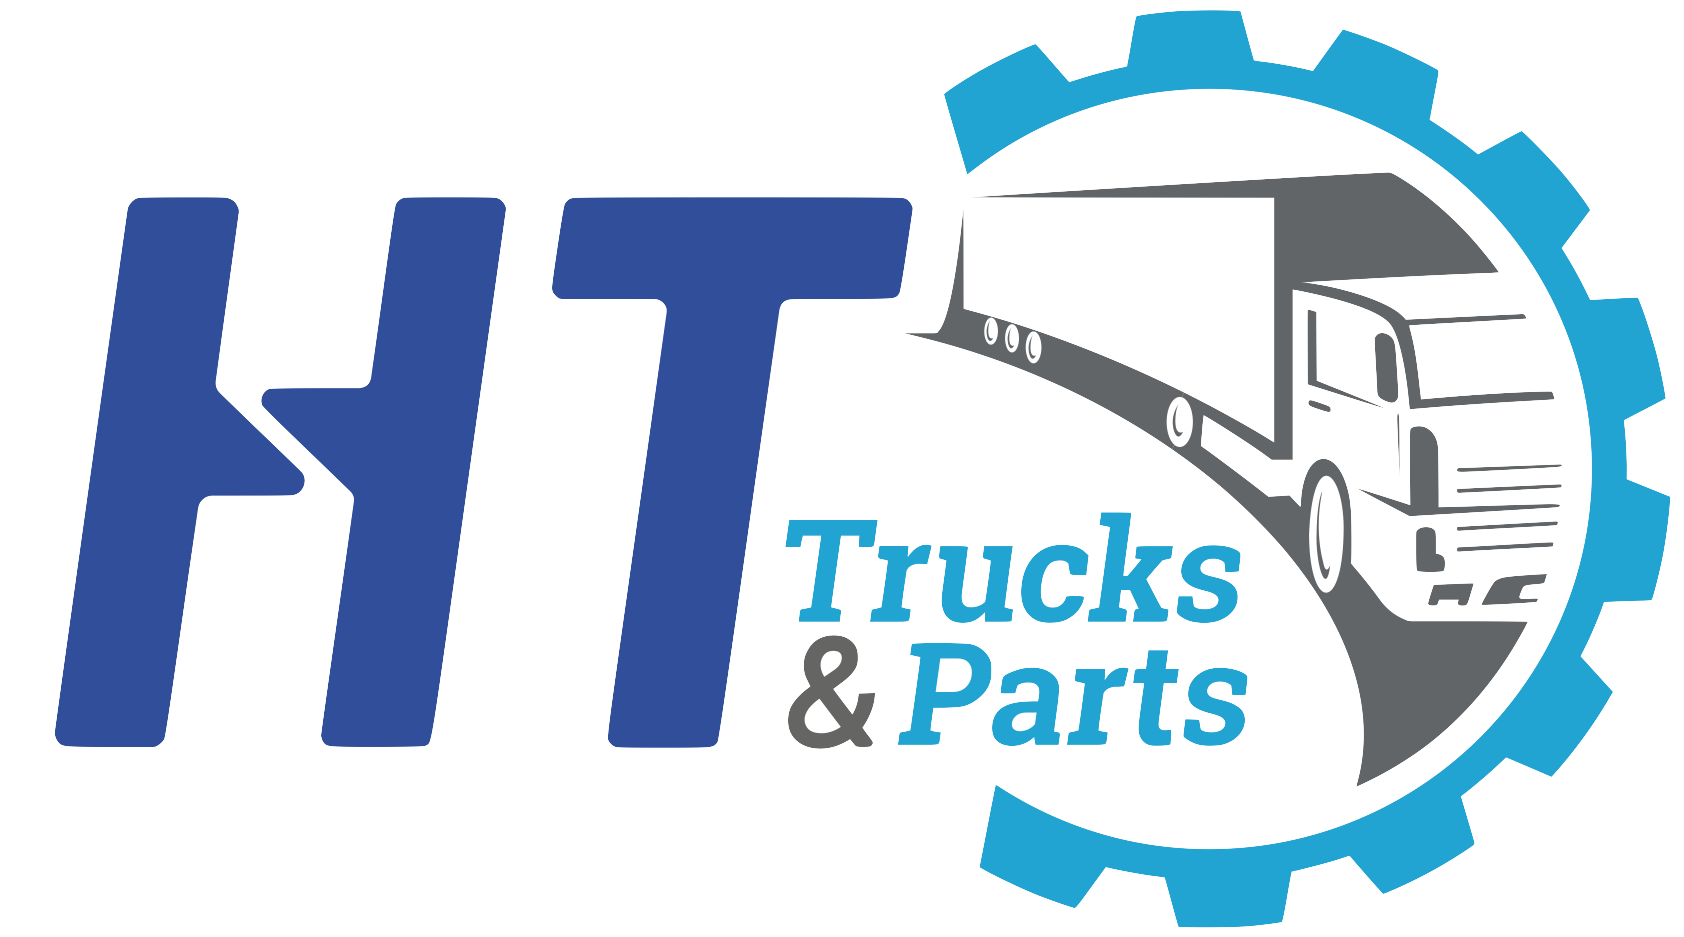 HT truck and parts logo 2